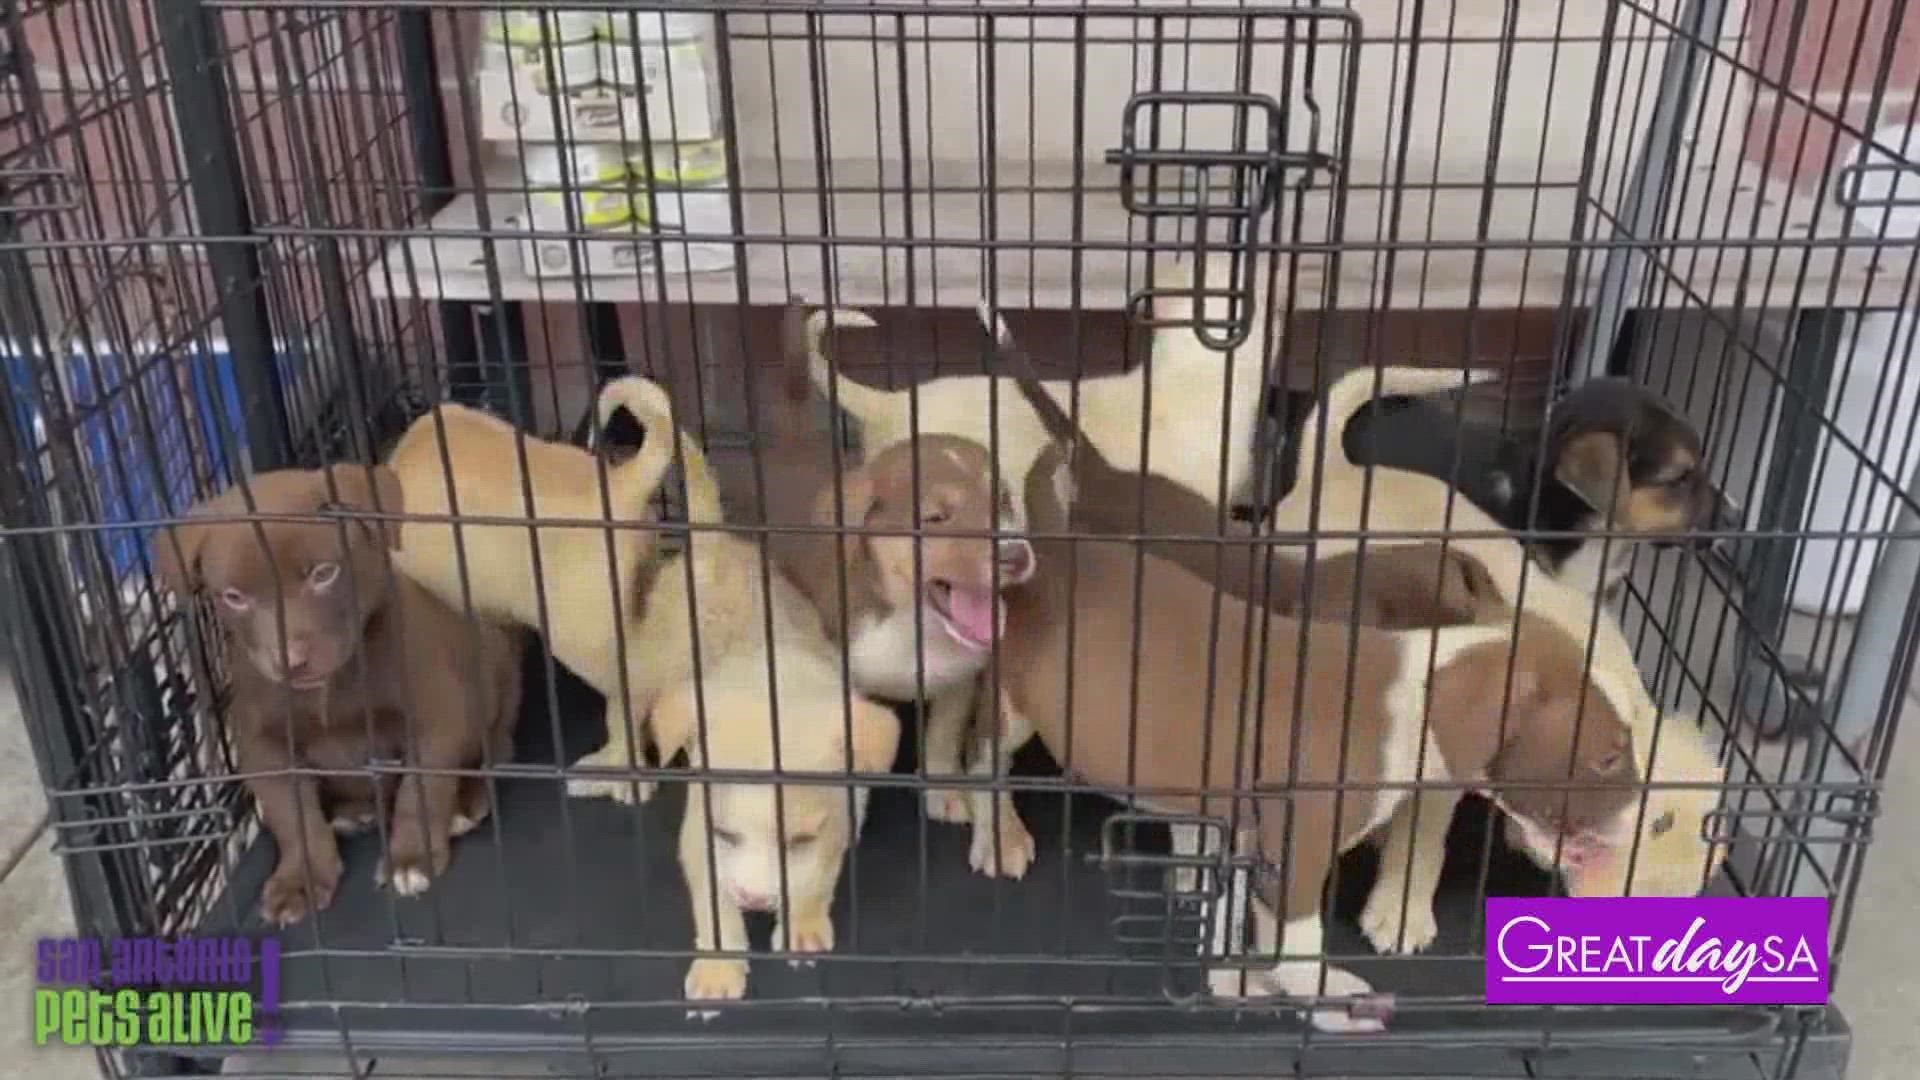 San Antonio Pets Alive! has a variety of dogs that are available for adoption as soon as today.